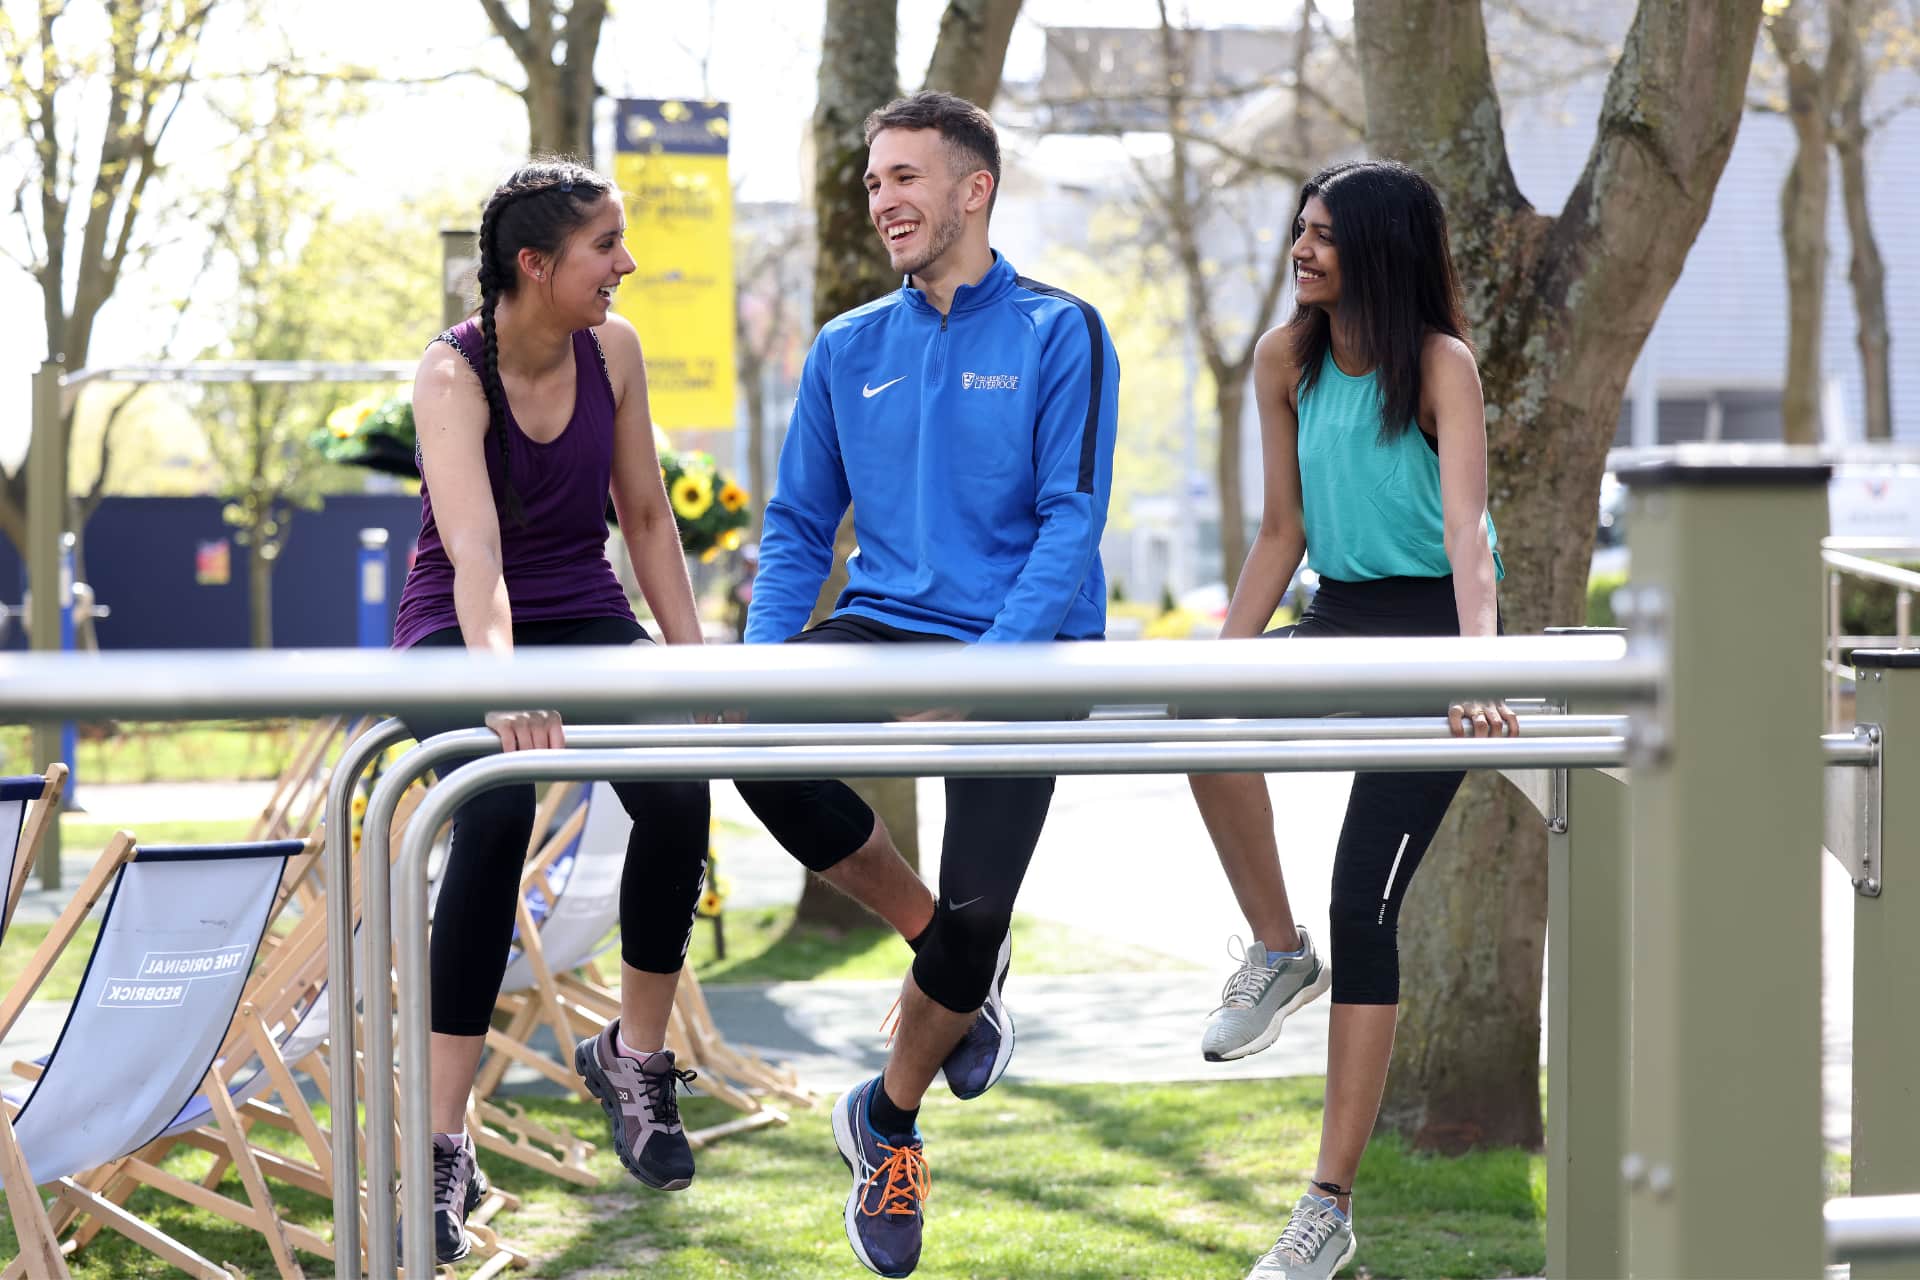 Three students sit on balance beams outside of the University of Liverpool's sport centre. They are wearing exercise clothes and smiling with each other.